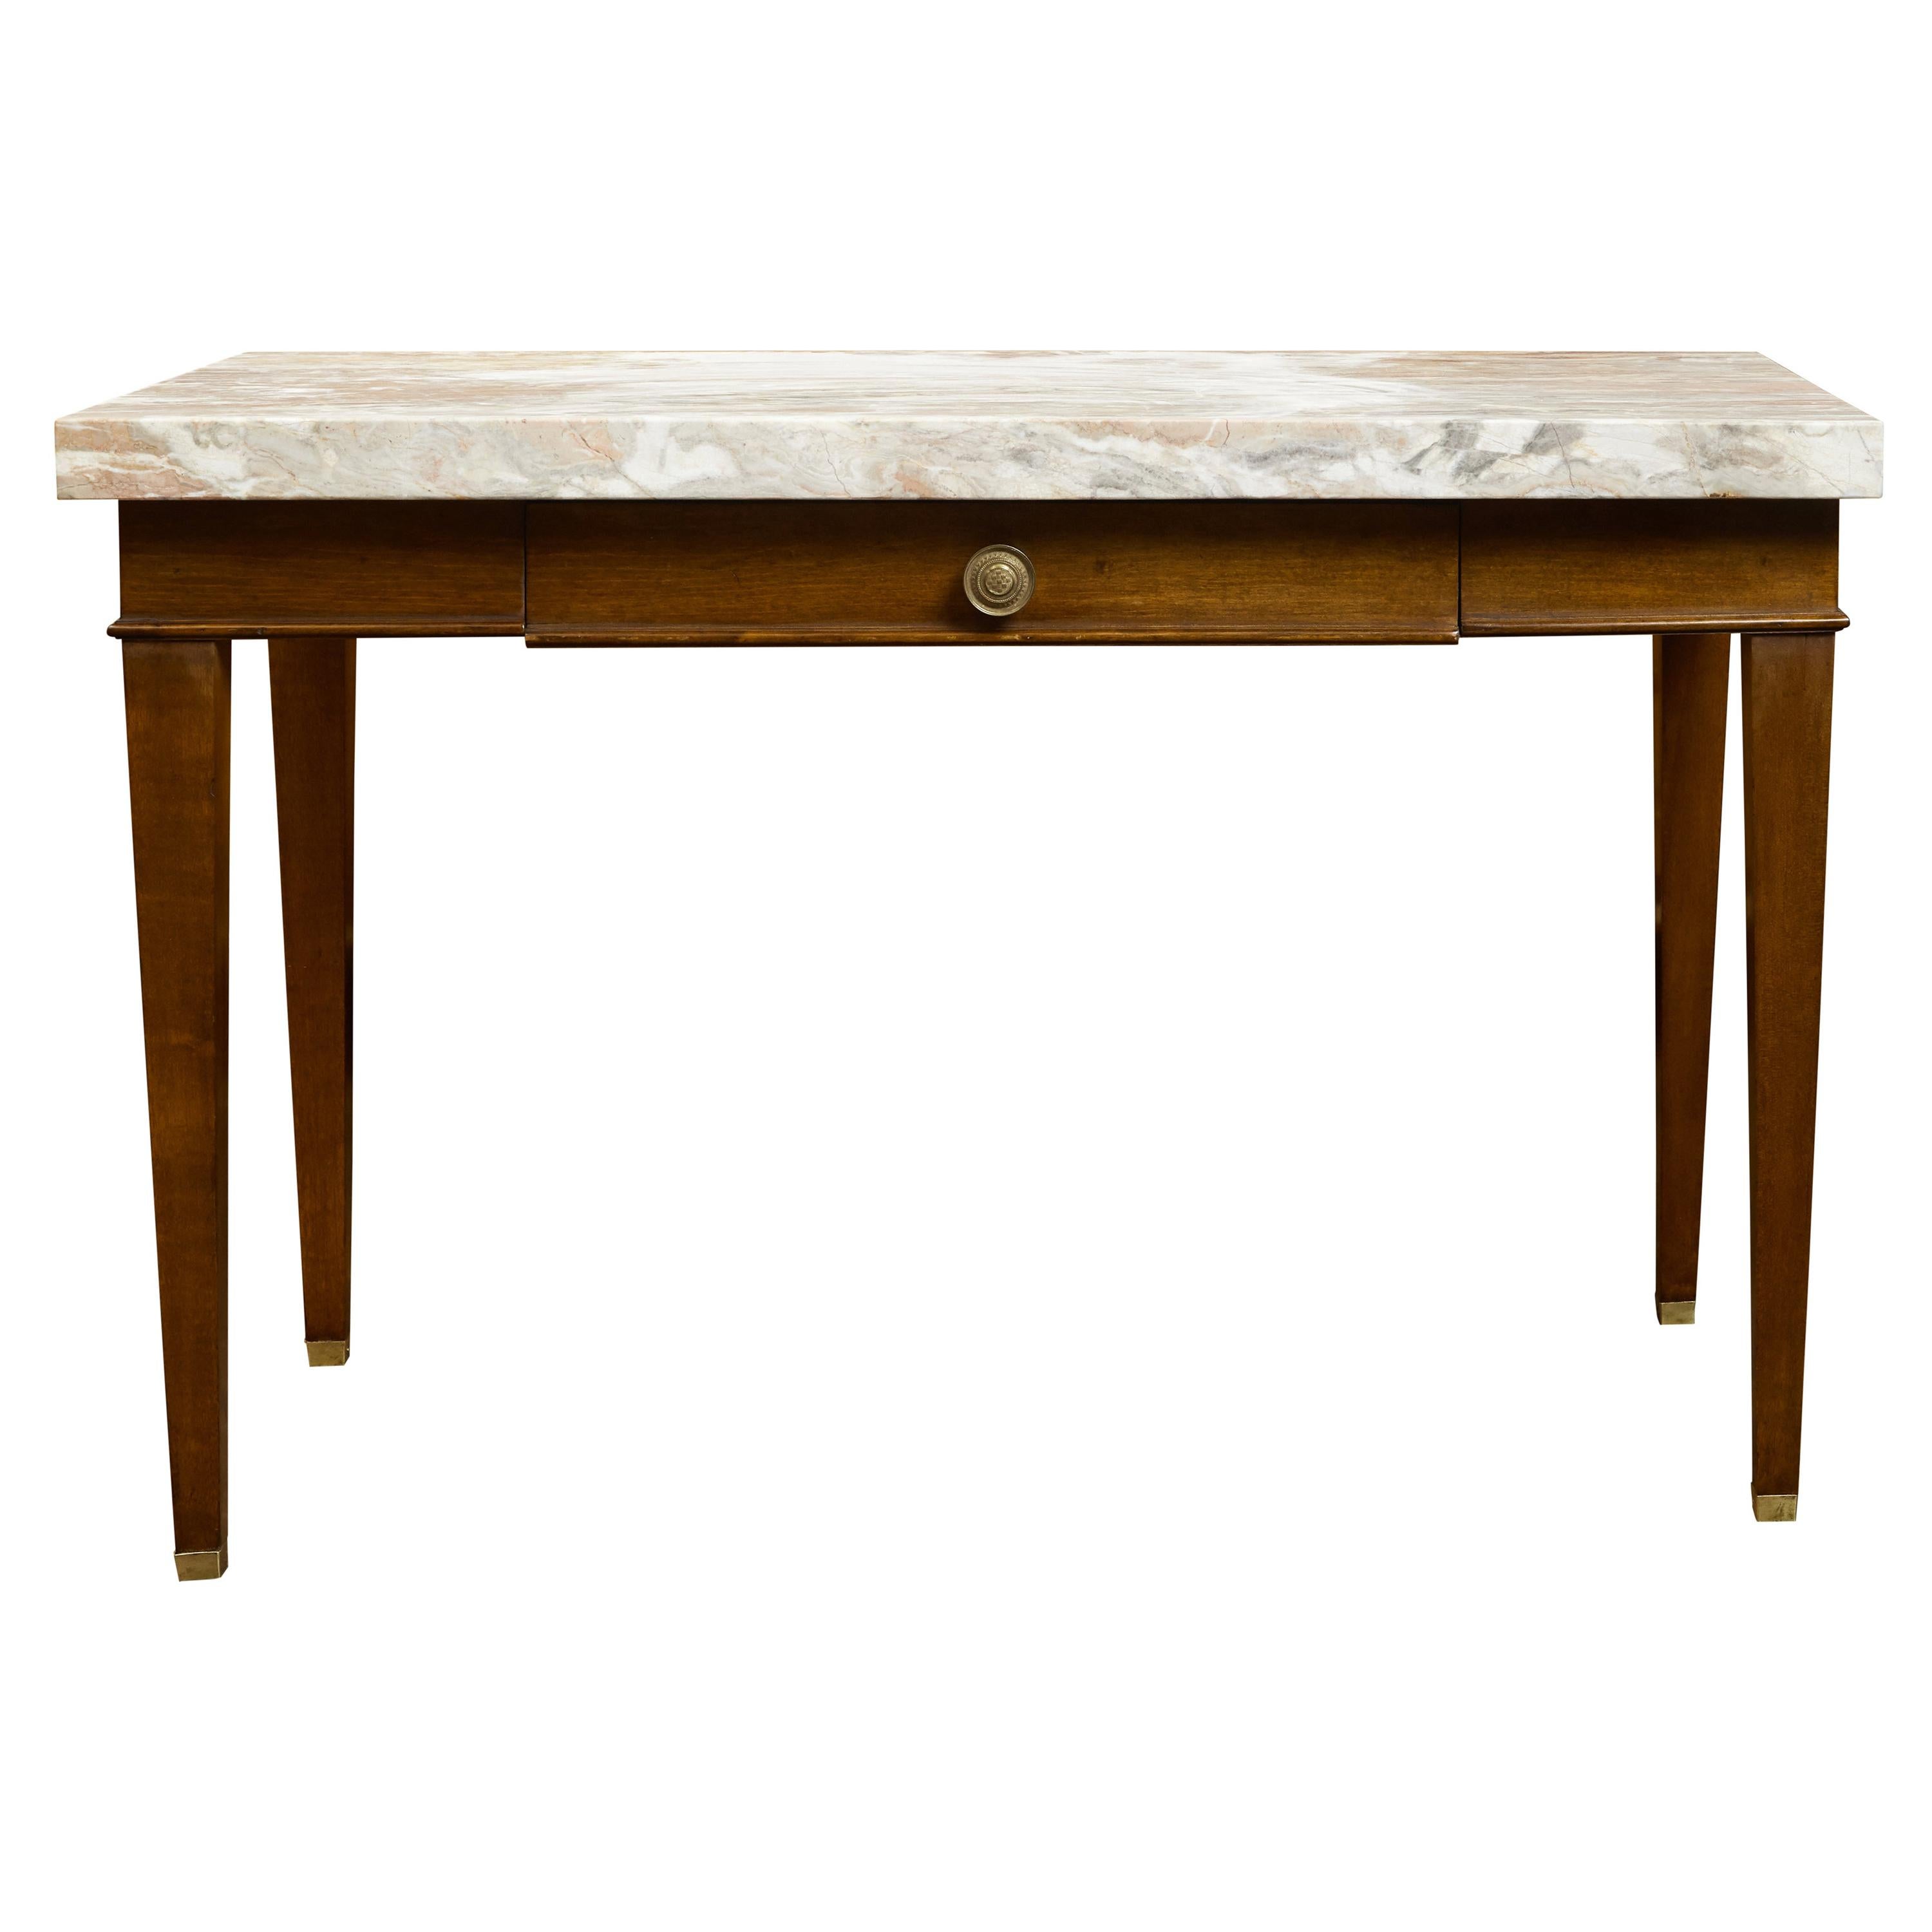 French 19th Century Walnut Table with Marble Top, Single Drawer and Tapered Legs